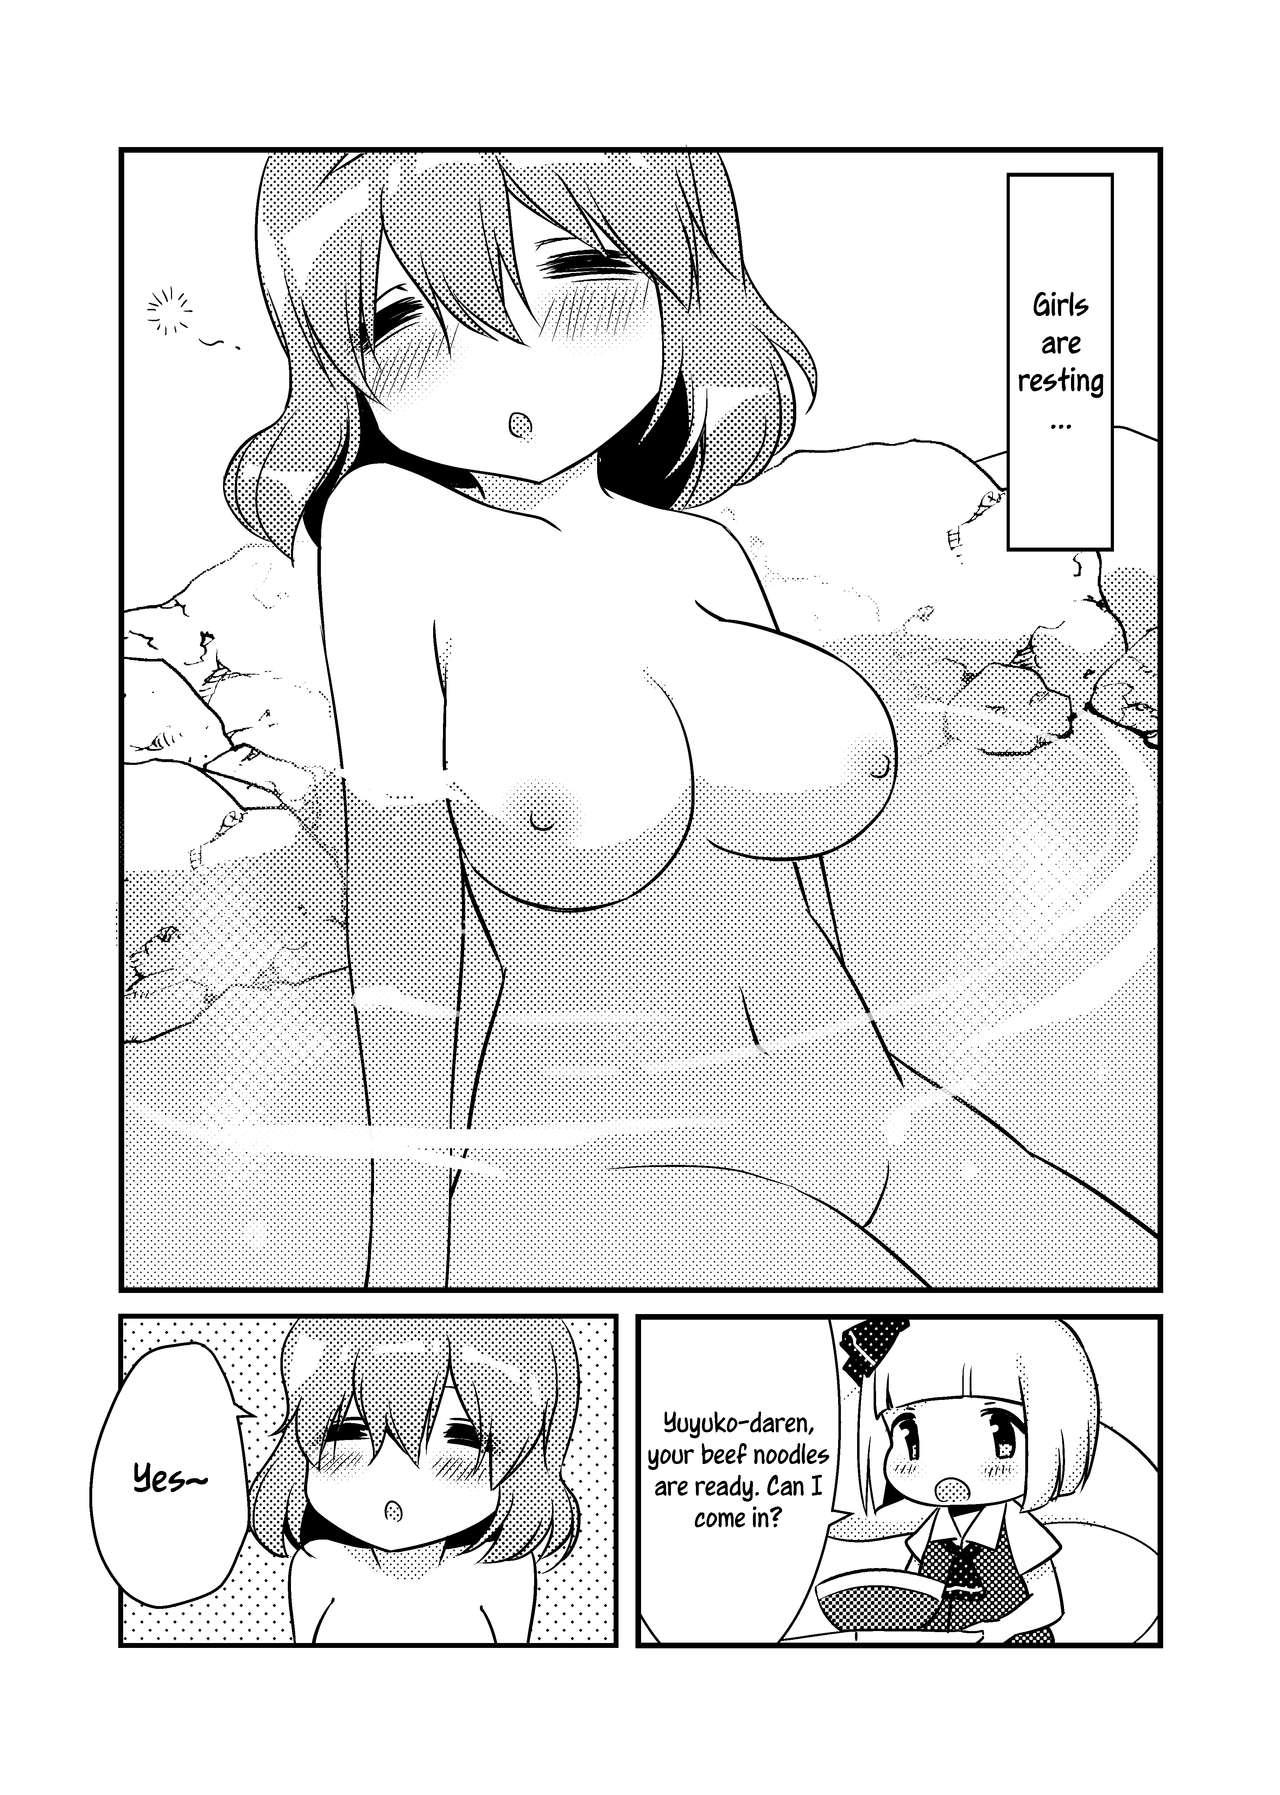 Sharing ????一起泡温泉吧！ | ????Let's Soak in the Hot Spring! - Touhou project Gay Kissing - Page 3